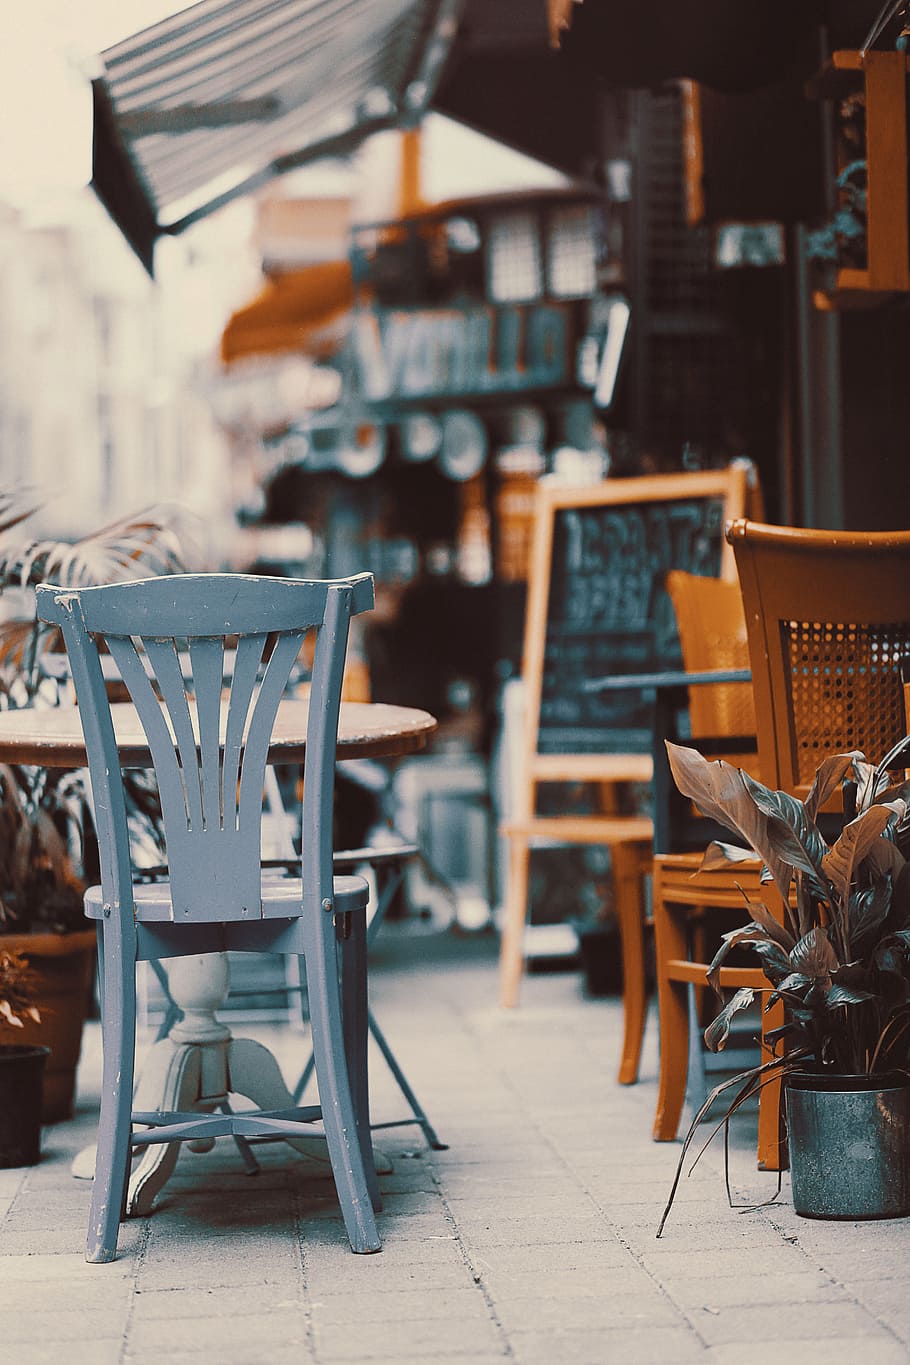 gray wooden chair, retro, vintage, istanbul, love, history, the forgotten, nostalgia, old, human